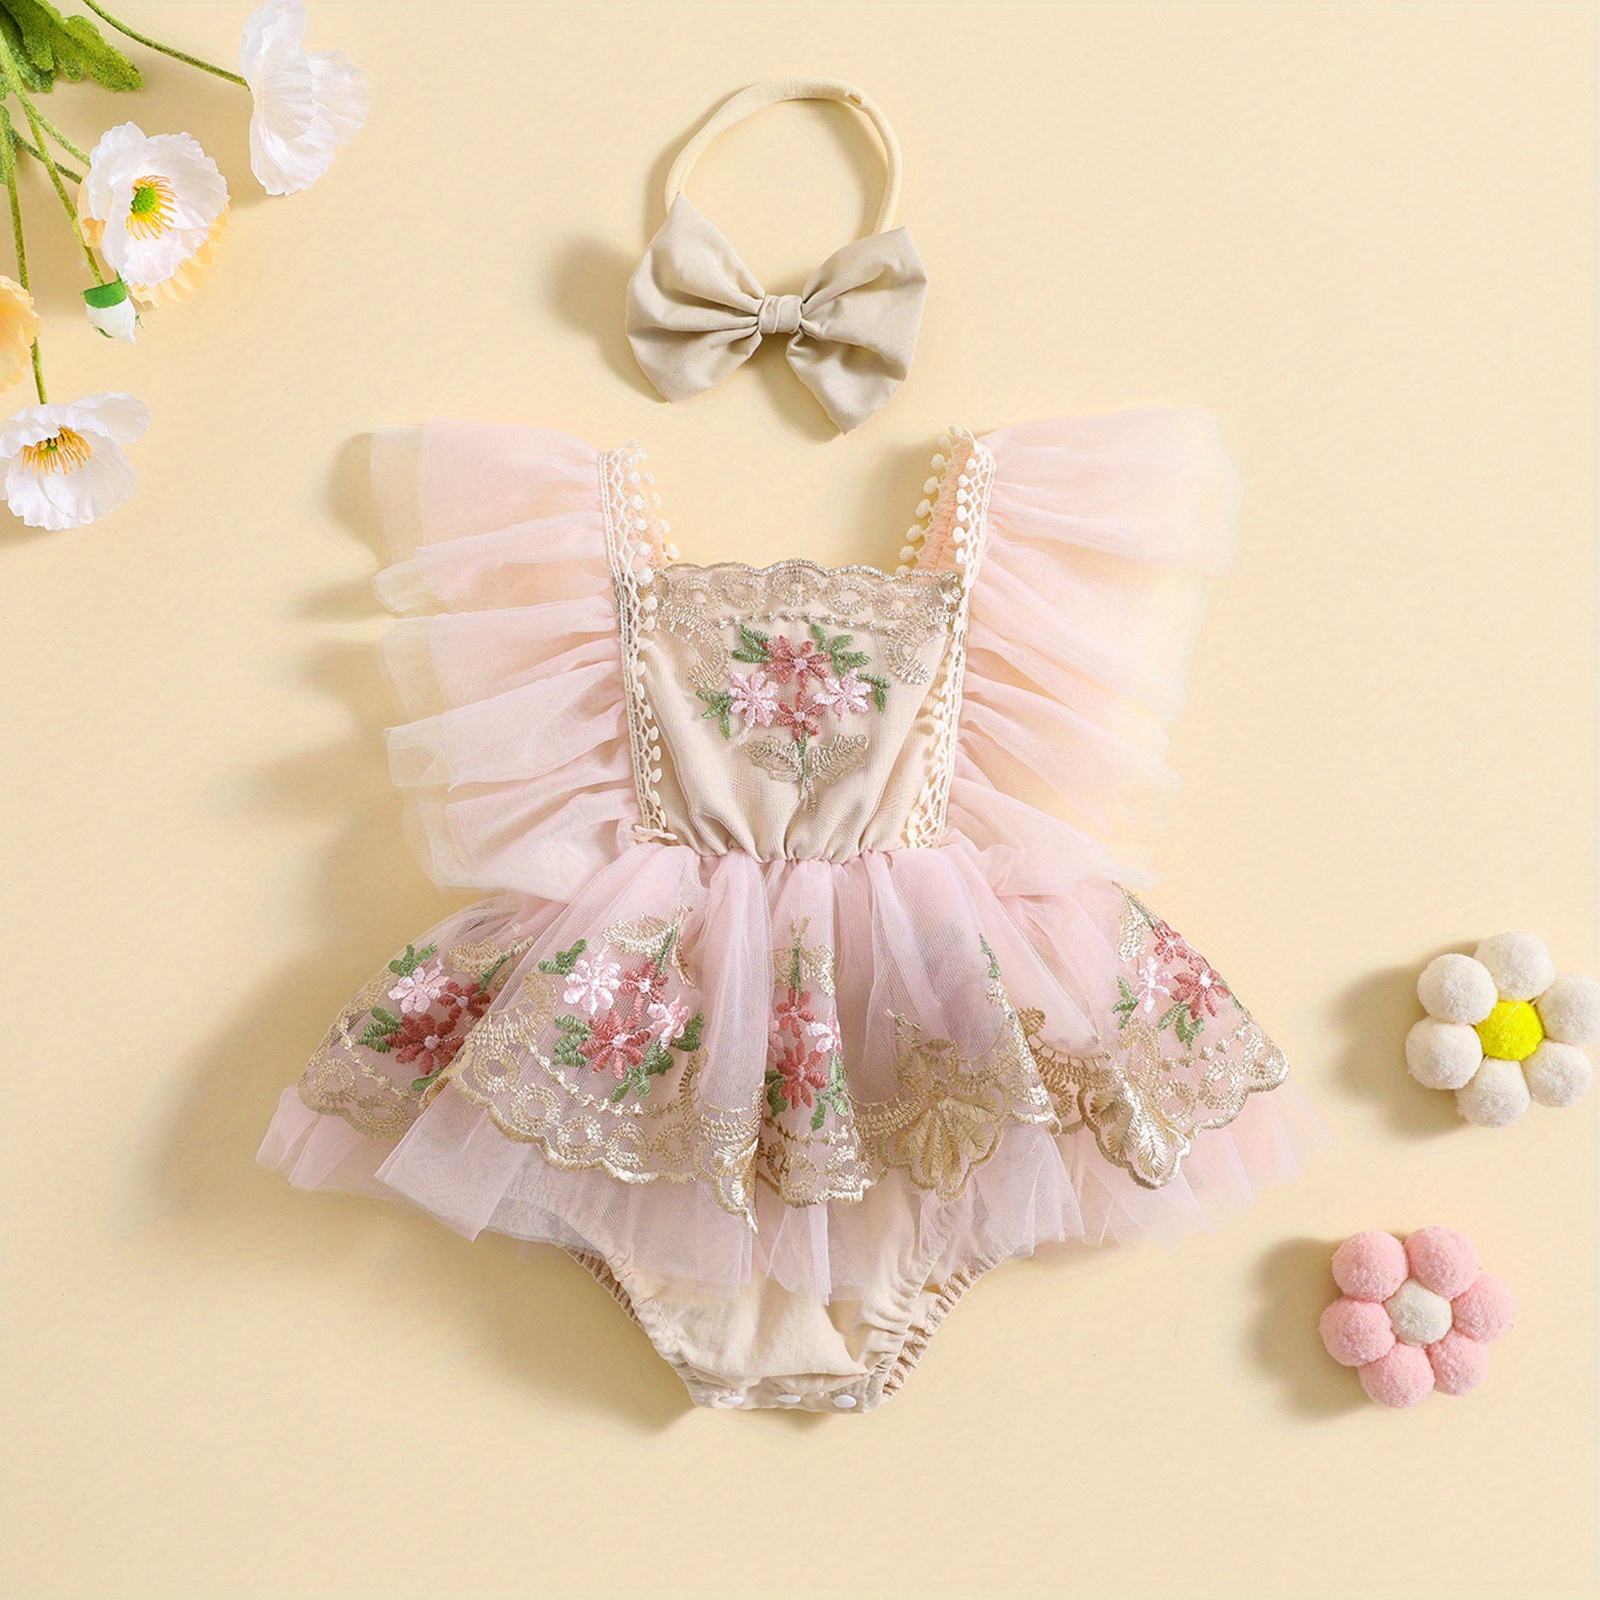 

Newborn Girl Cute Outfit, Embroidery Flower Fly Sleeve Romper With Bowknot Hairband Fashion Clothes